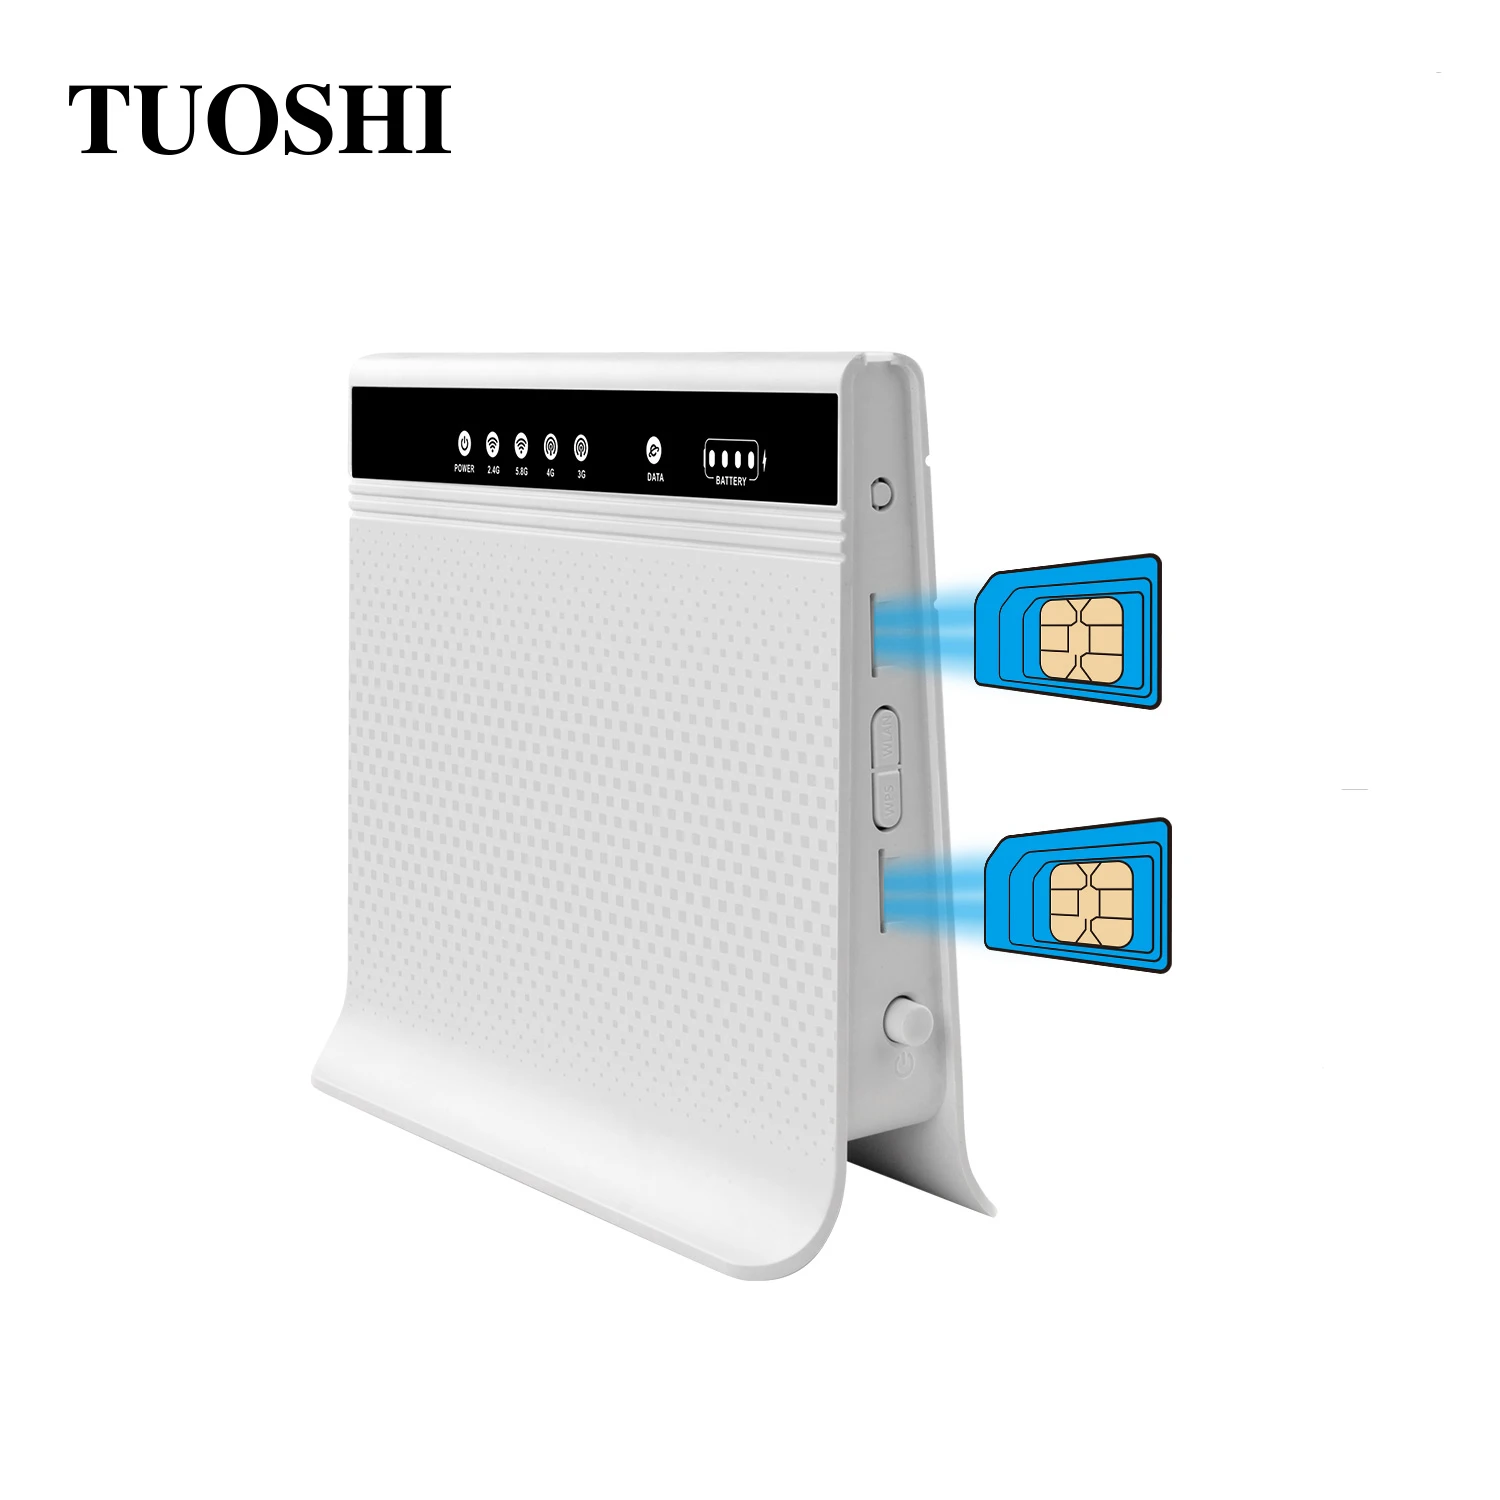 infrastruktur Snuble hensynsløs Source 4G wifi extender router with Dual SIM card slot secure high-speed  data transmission 4g wifi router 1200mbps Removable battery on m.alibaba.com